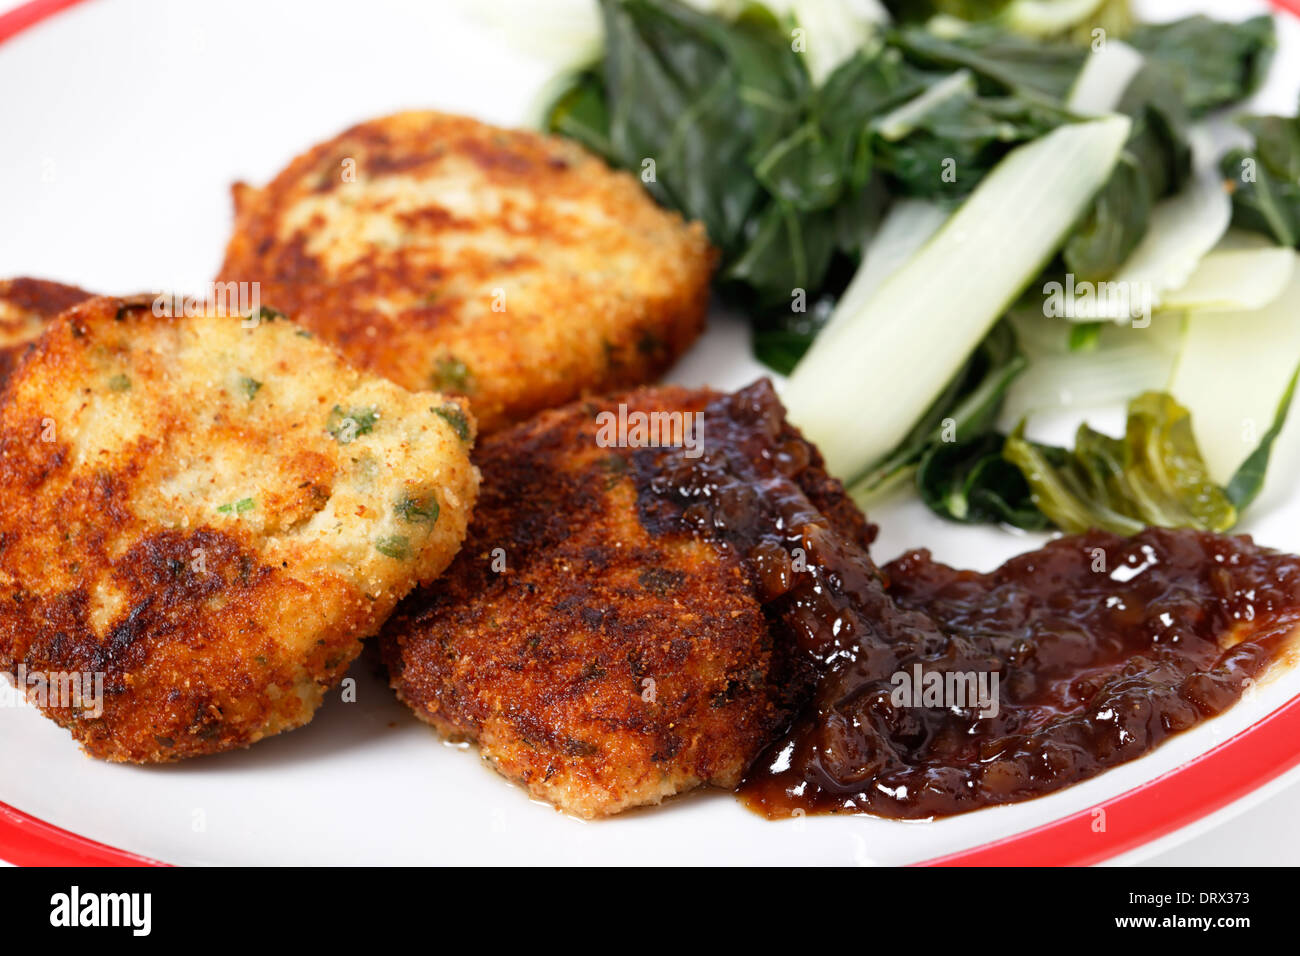 Homemade fishcakes and onion marmalade serves with boiled greens Stock Photo